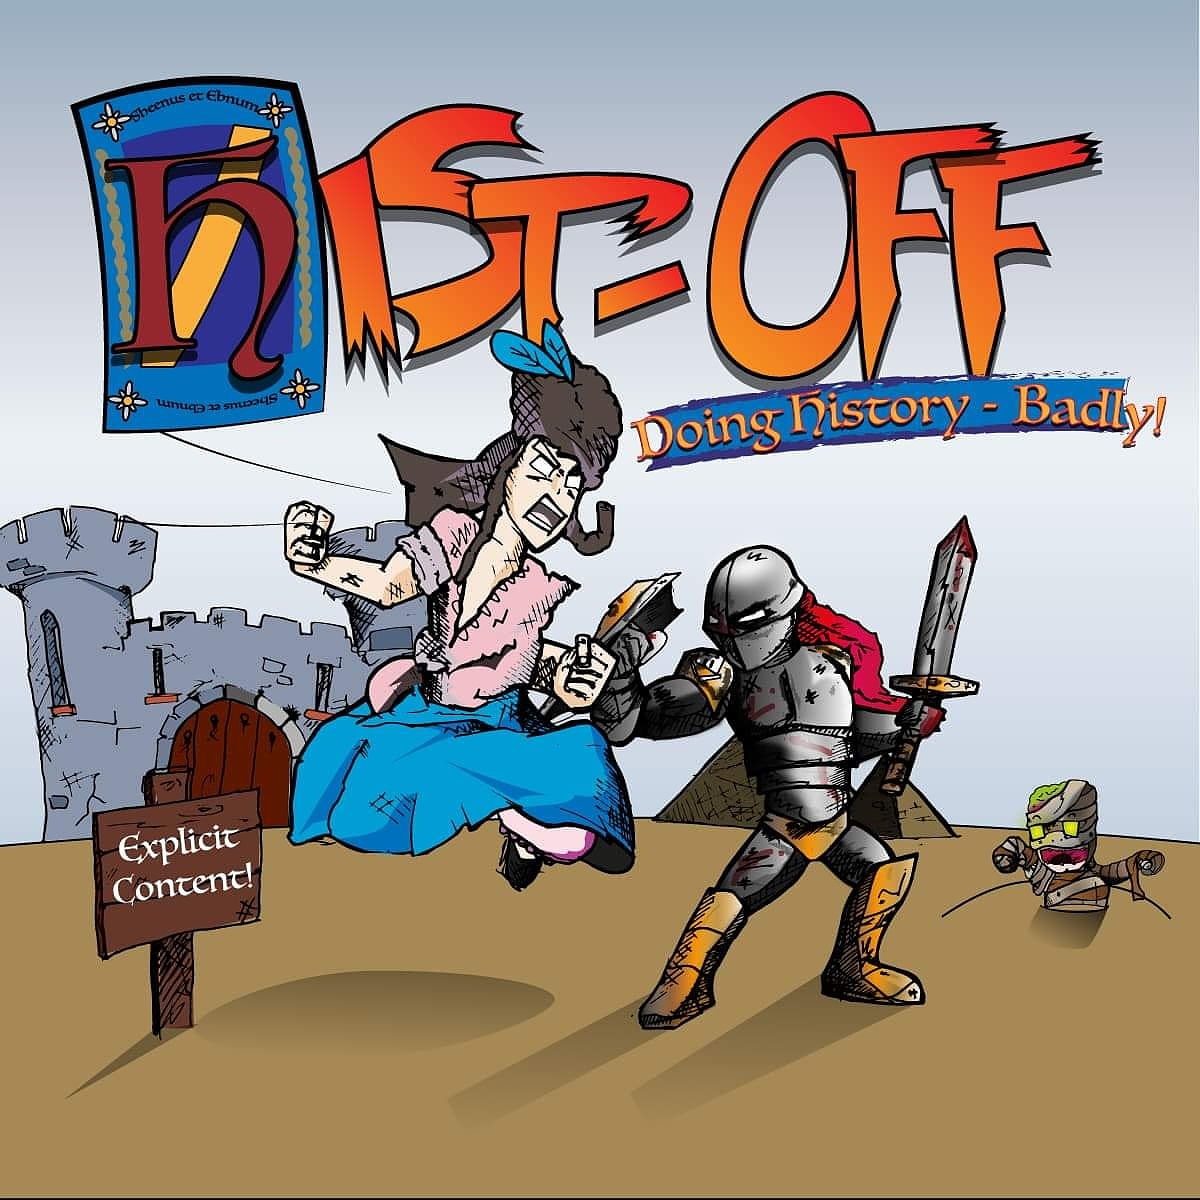 Hist-Off Podcast